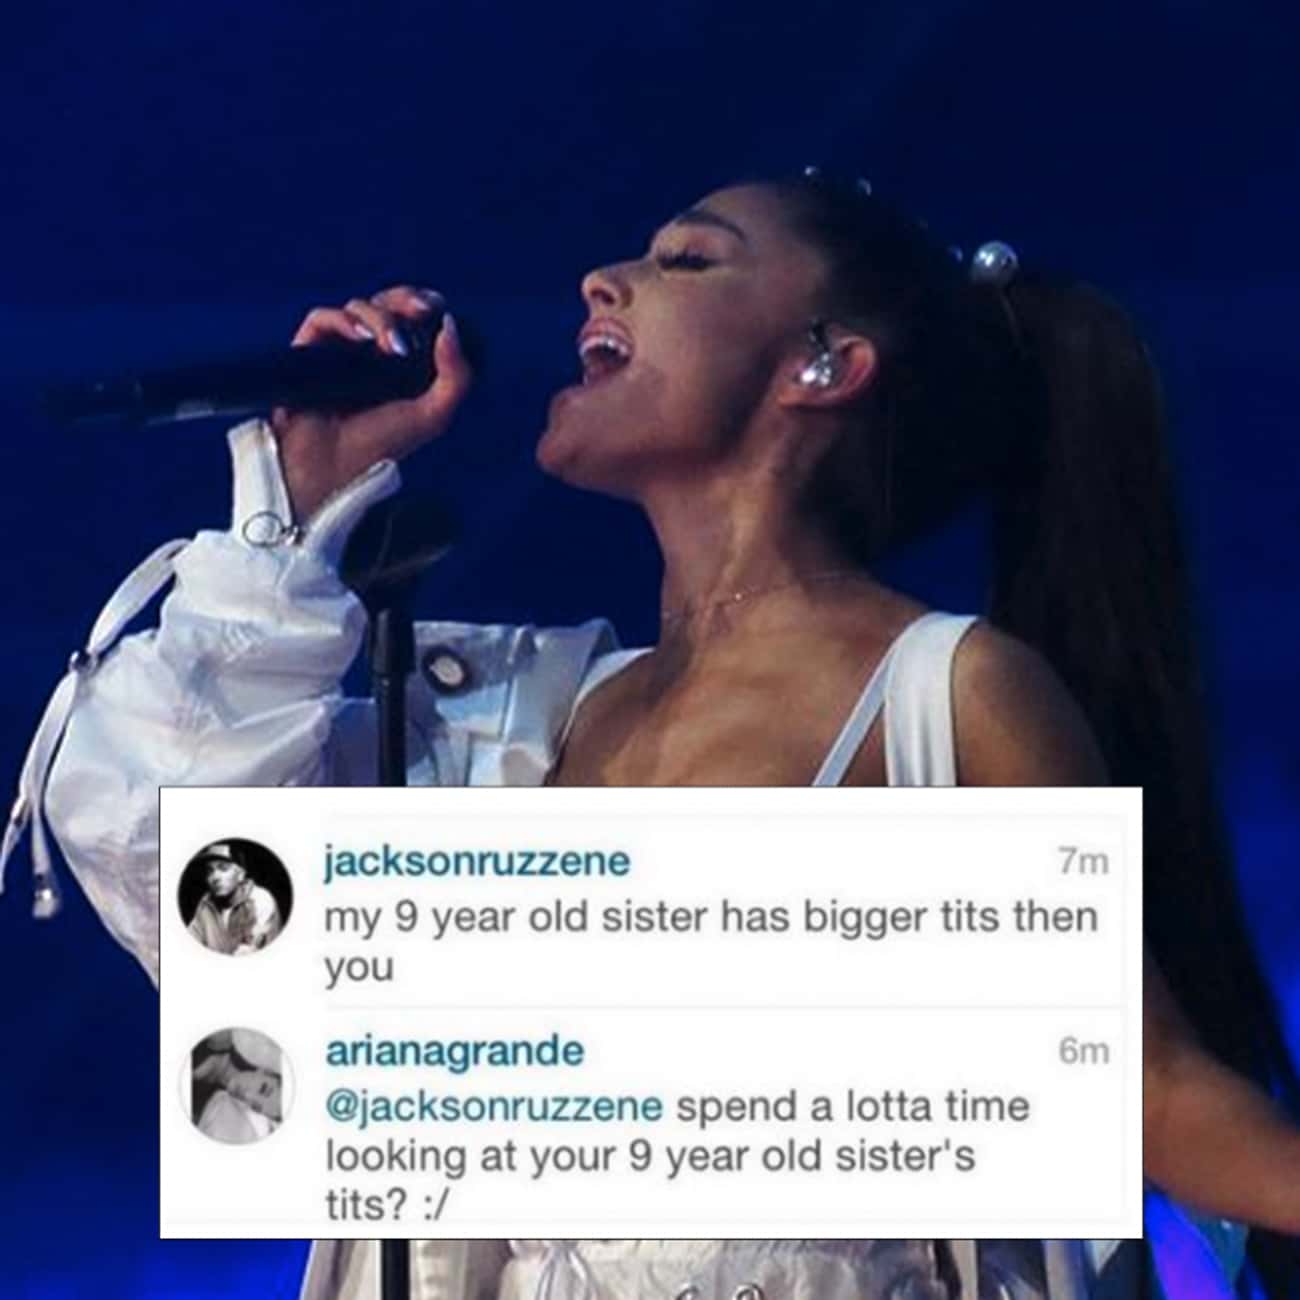 celebs savage replies - does ariana grande support lgbtq - jacksonruzzene 7m my 9 year old sister has bigger tits then you arianagrande spend a lotta time looking at your 9 year old sister's tits? 6m